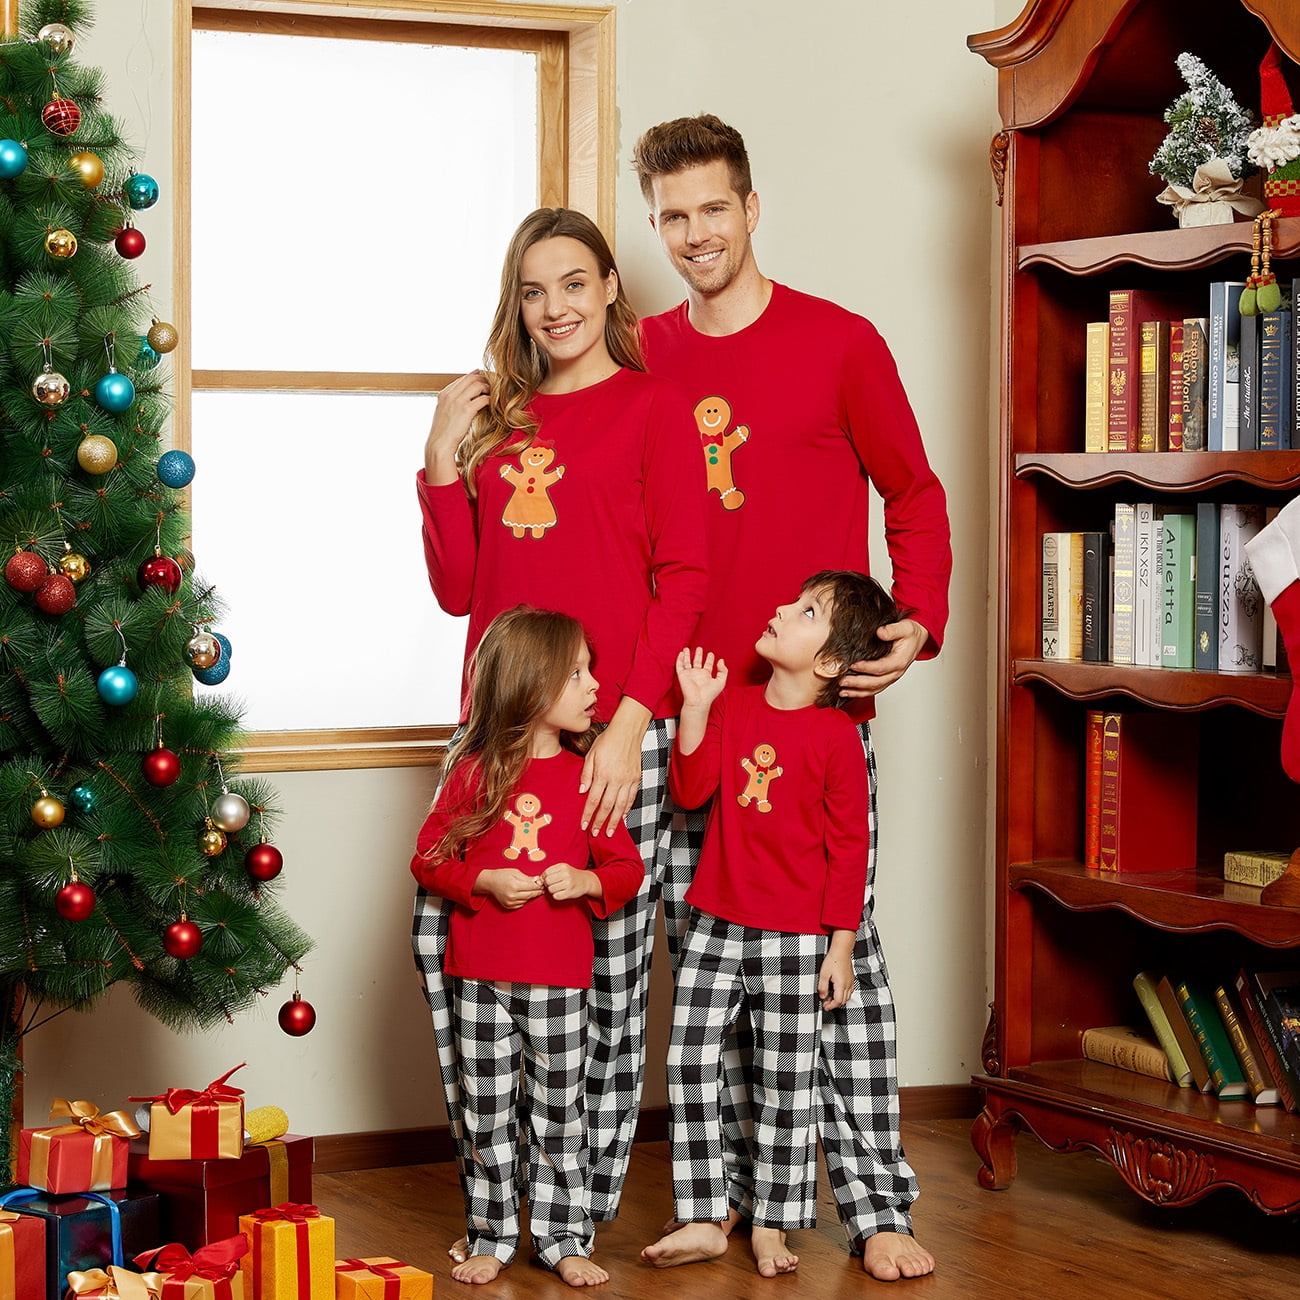 Red Family PJs Unisex Baby Boys' or Girls' Santa Suit Christmas Footed Pajamas 